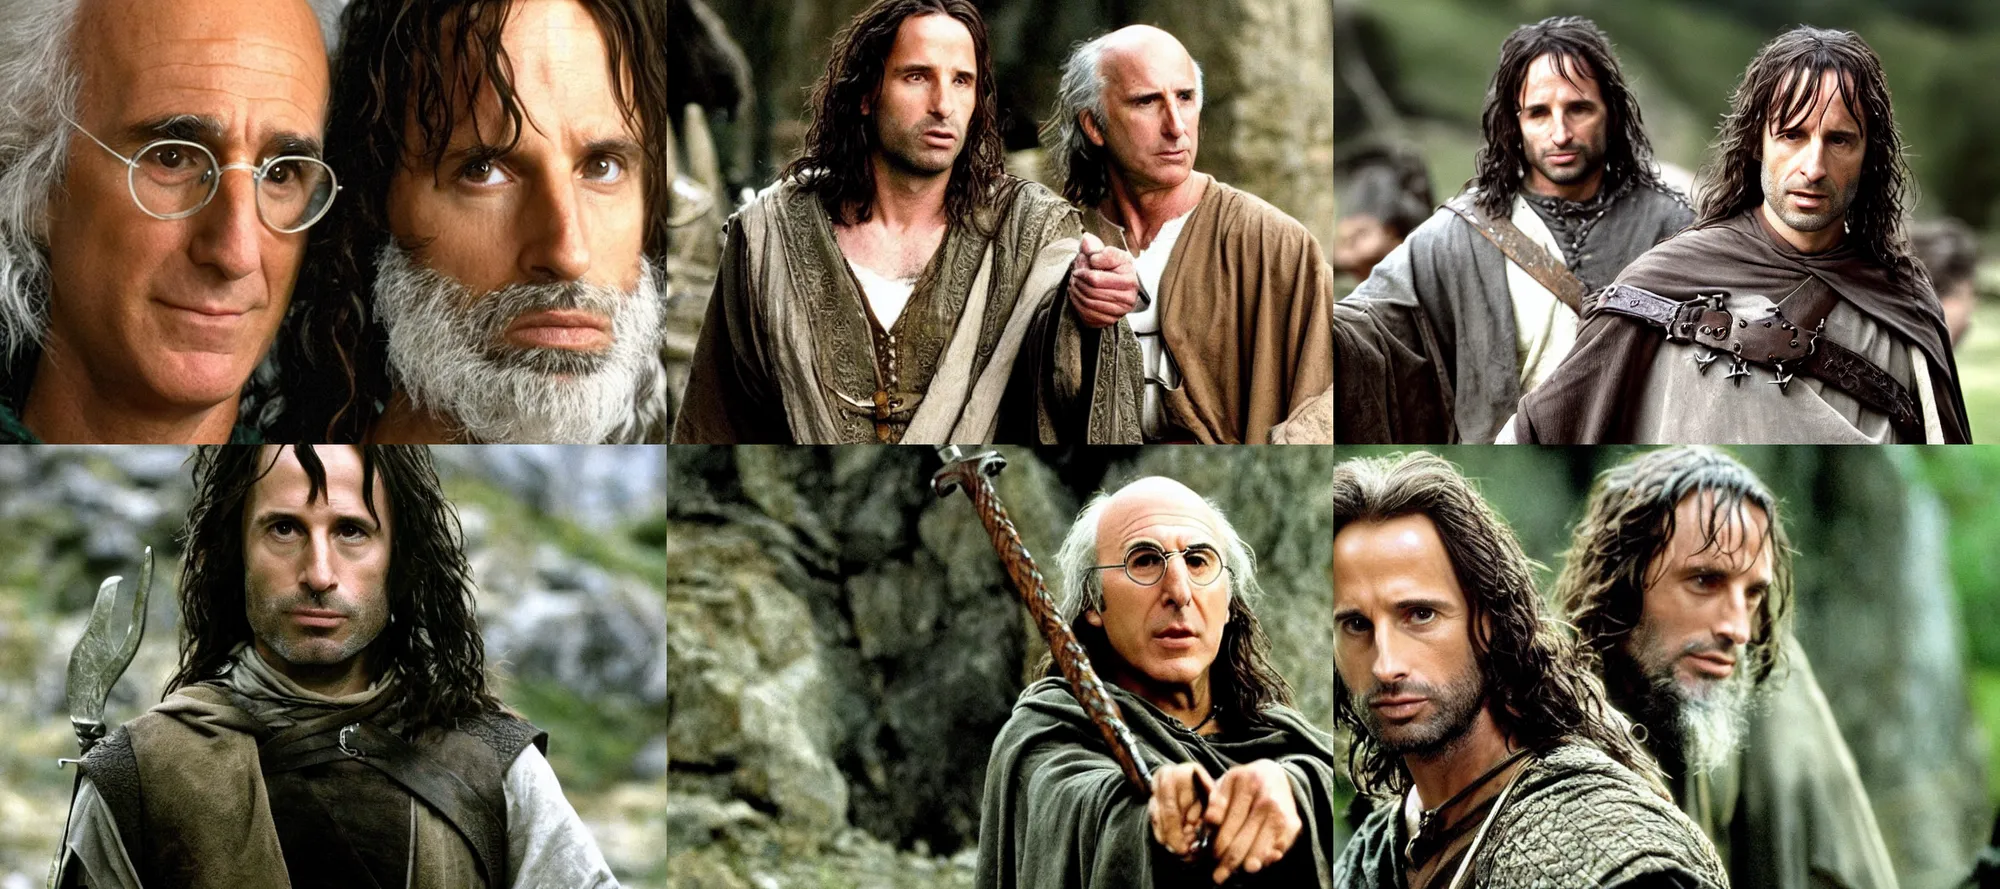 Bob Odenkirk as Aragorn in Lord of the Rings, Stable Diffusion